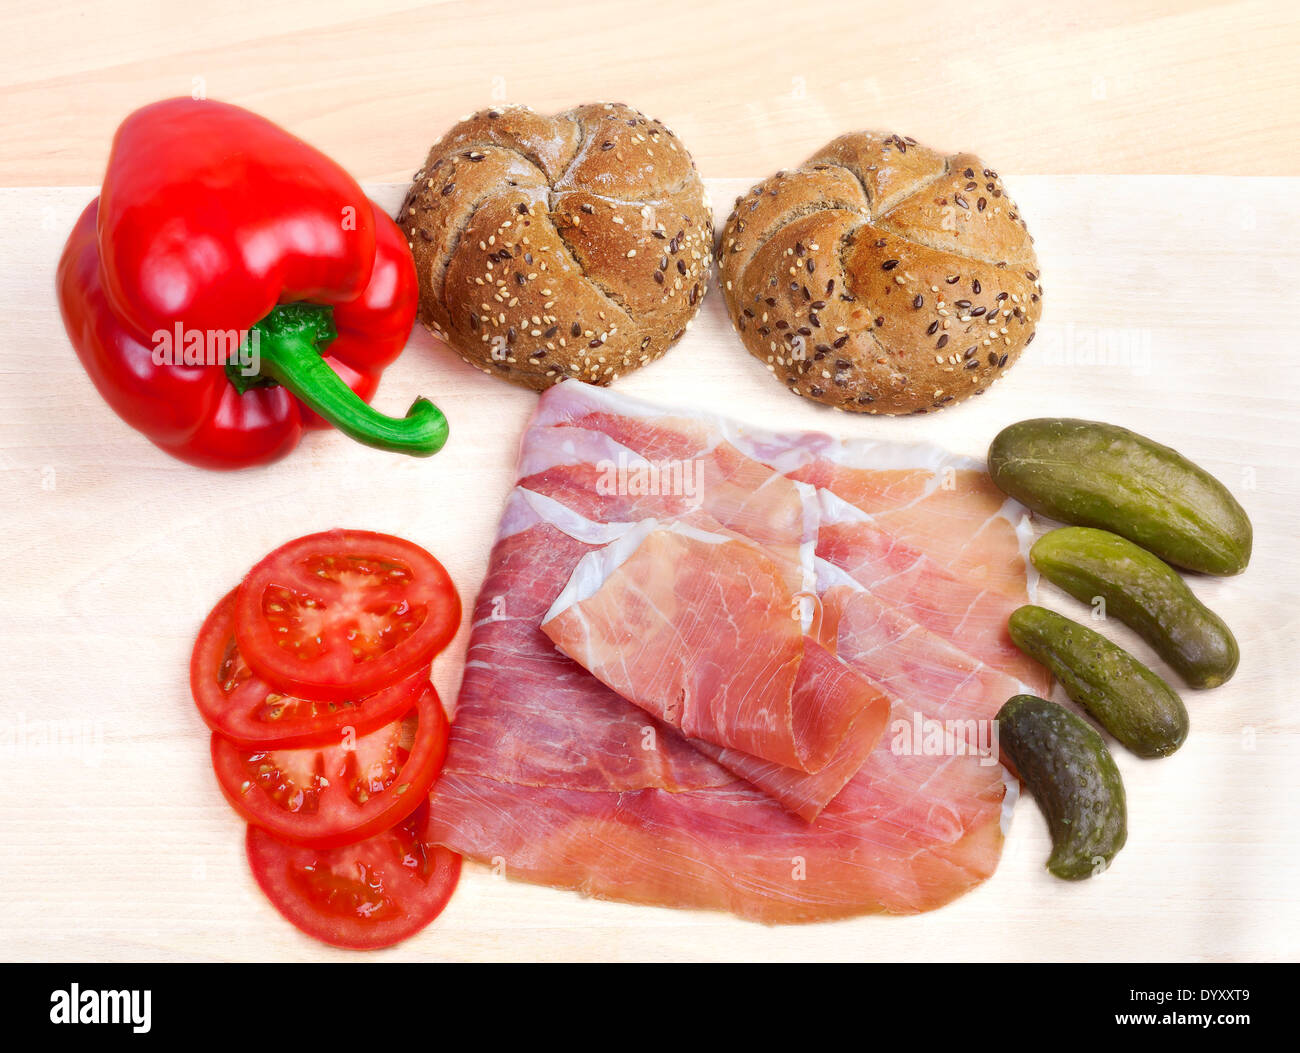 Vegetables with ham and wholewheat buns Stock Photo